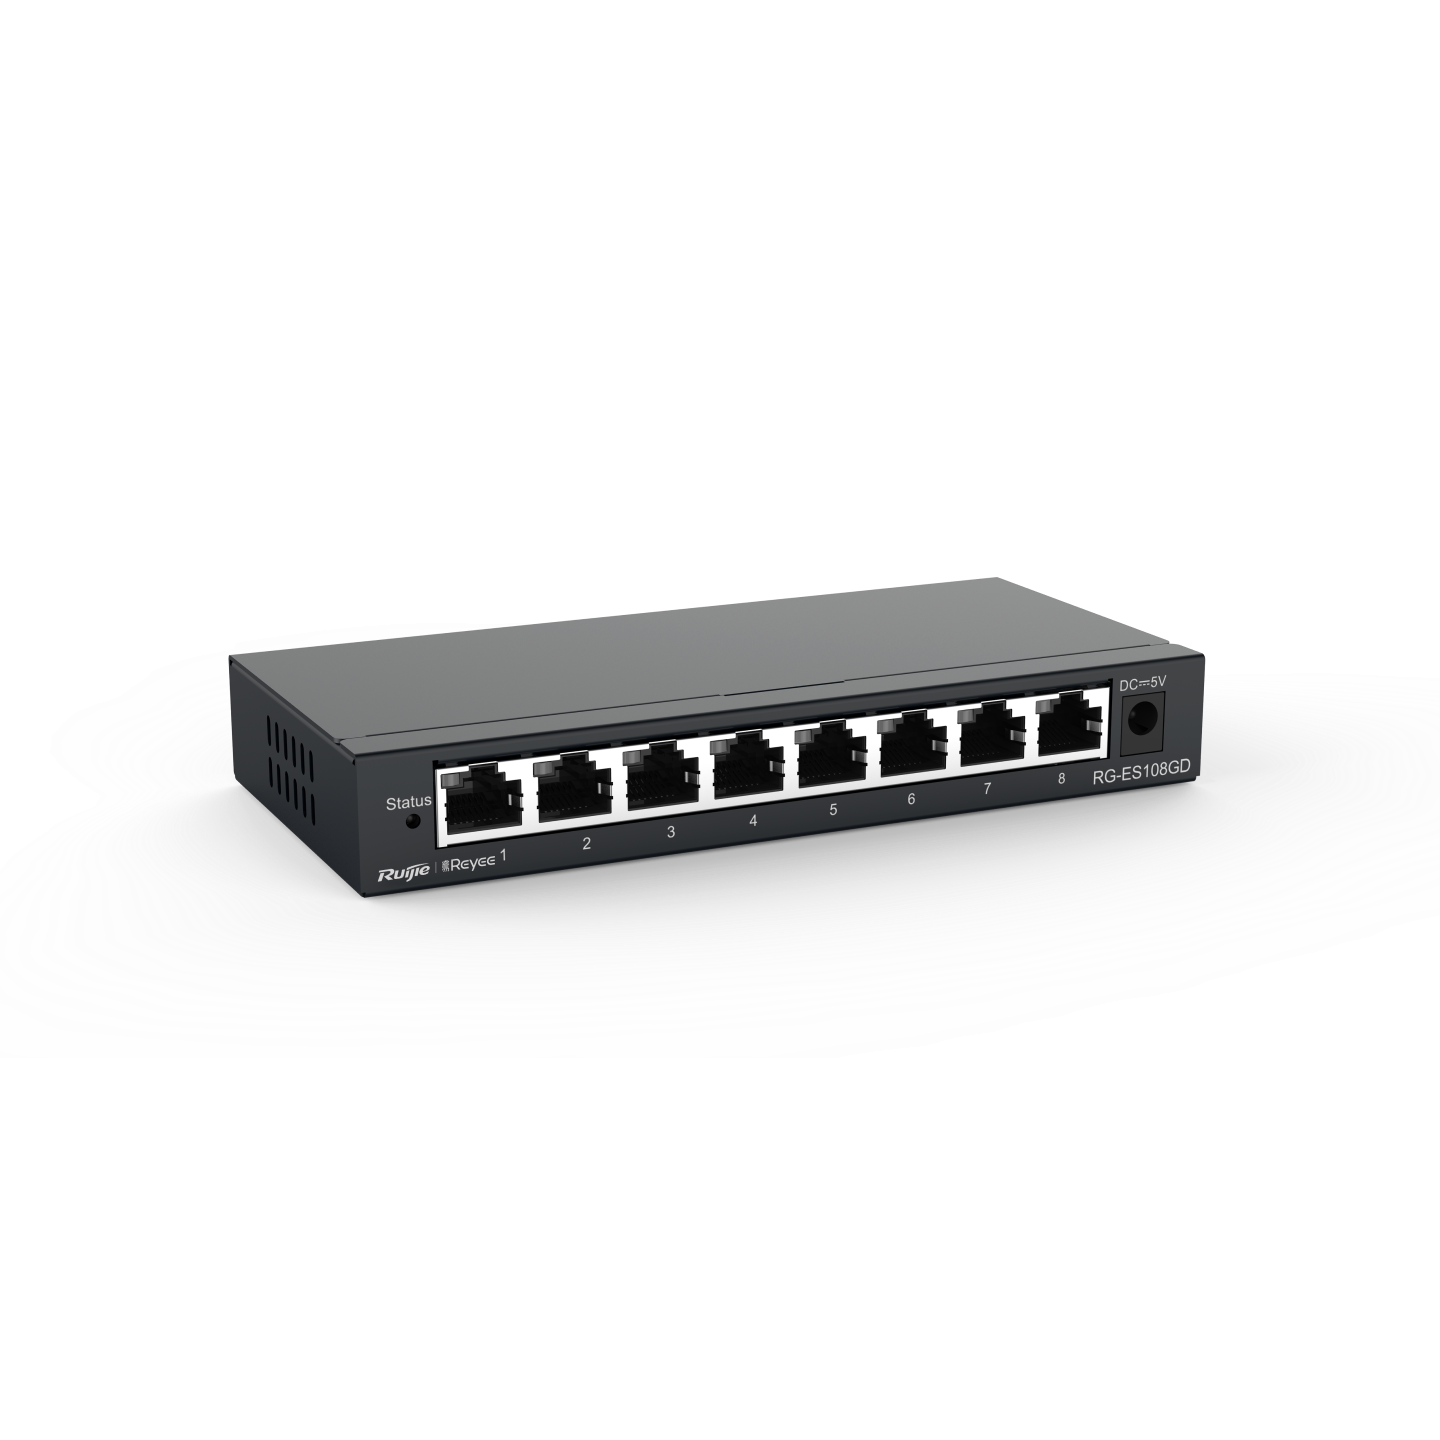 Ruijie RG-ES105GD, 8-port 10/100/1000Mbps Unmanaged Non-PoE Switch